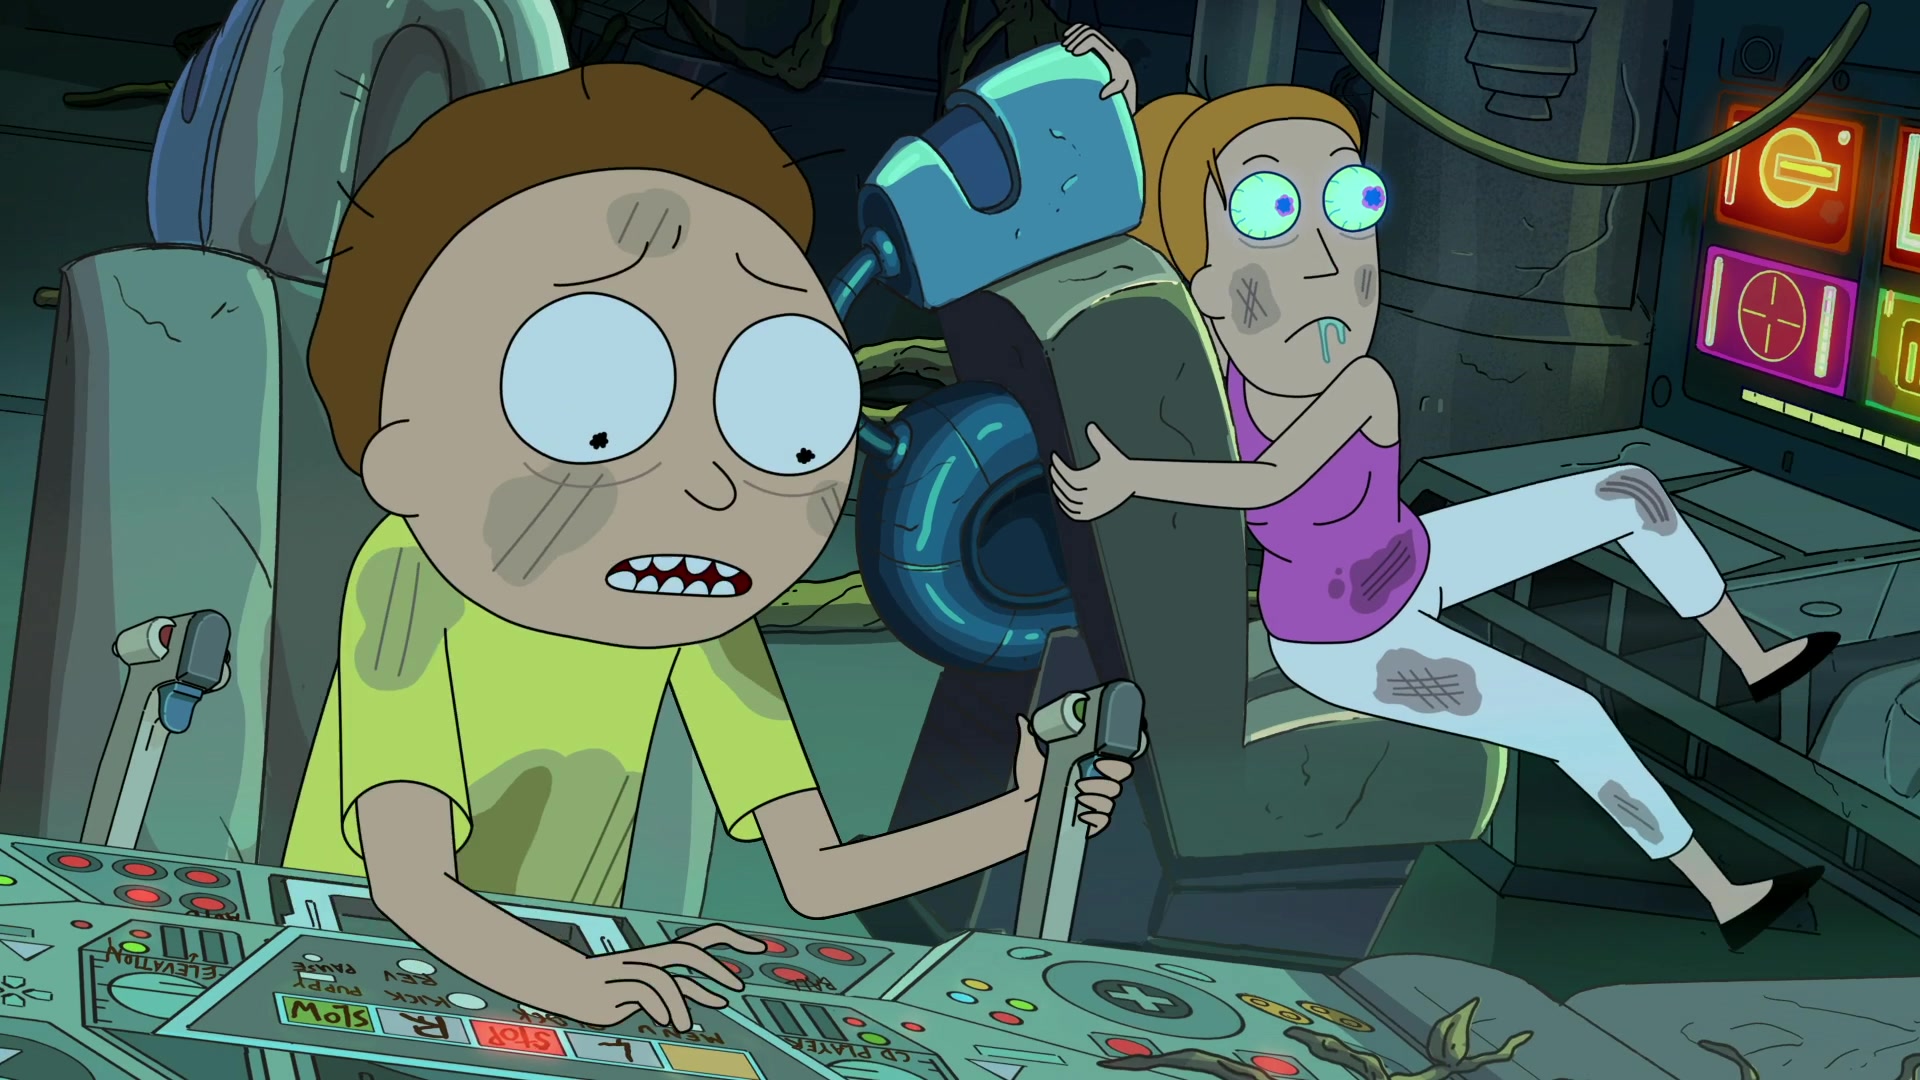 Morty (Justin Roiland) and Summer (Spencer Grammer) attempt to take off in Rick and Morty Season 4 Episode 9 "Childrick of Mort" (2020), Adult Swim